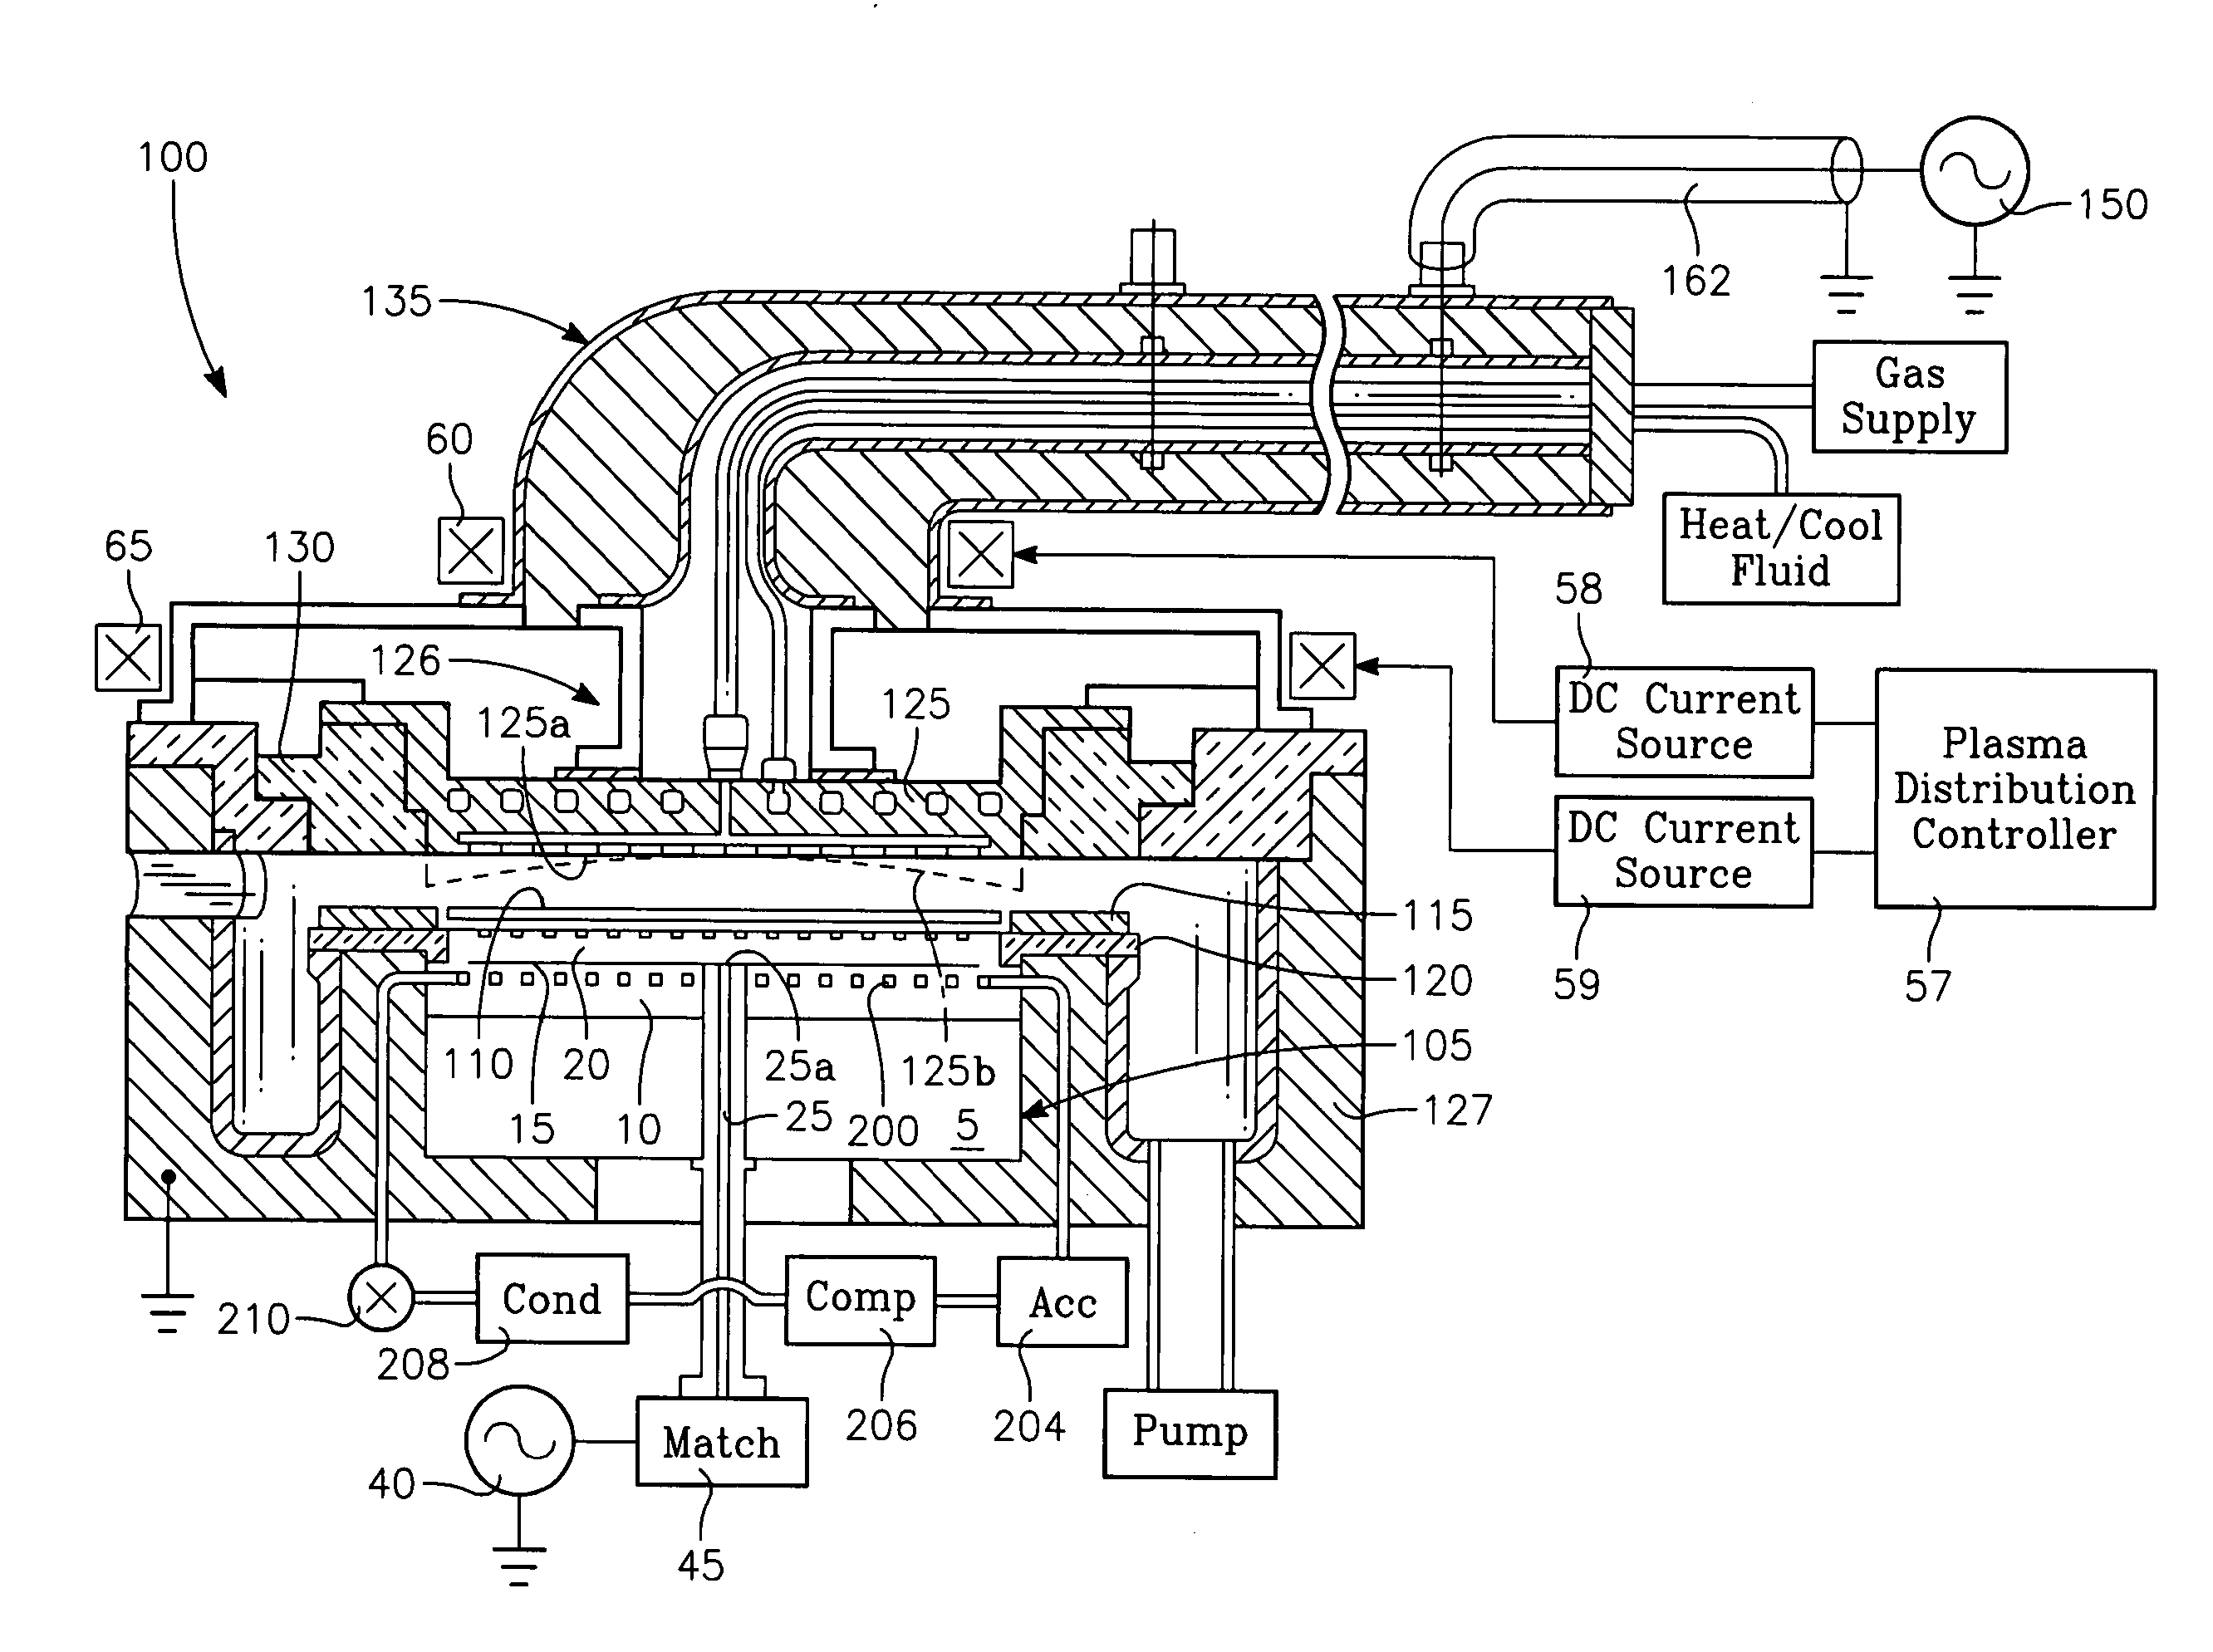 Plasma reactor with feed forward thermal control system using a thermal model for accommodating RF power changes or wafer temperature changes